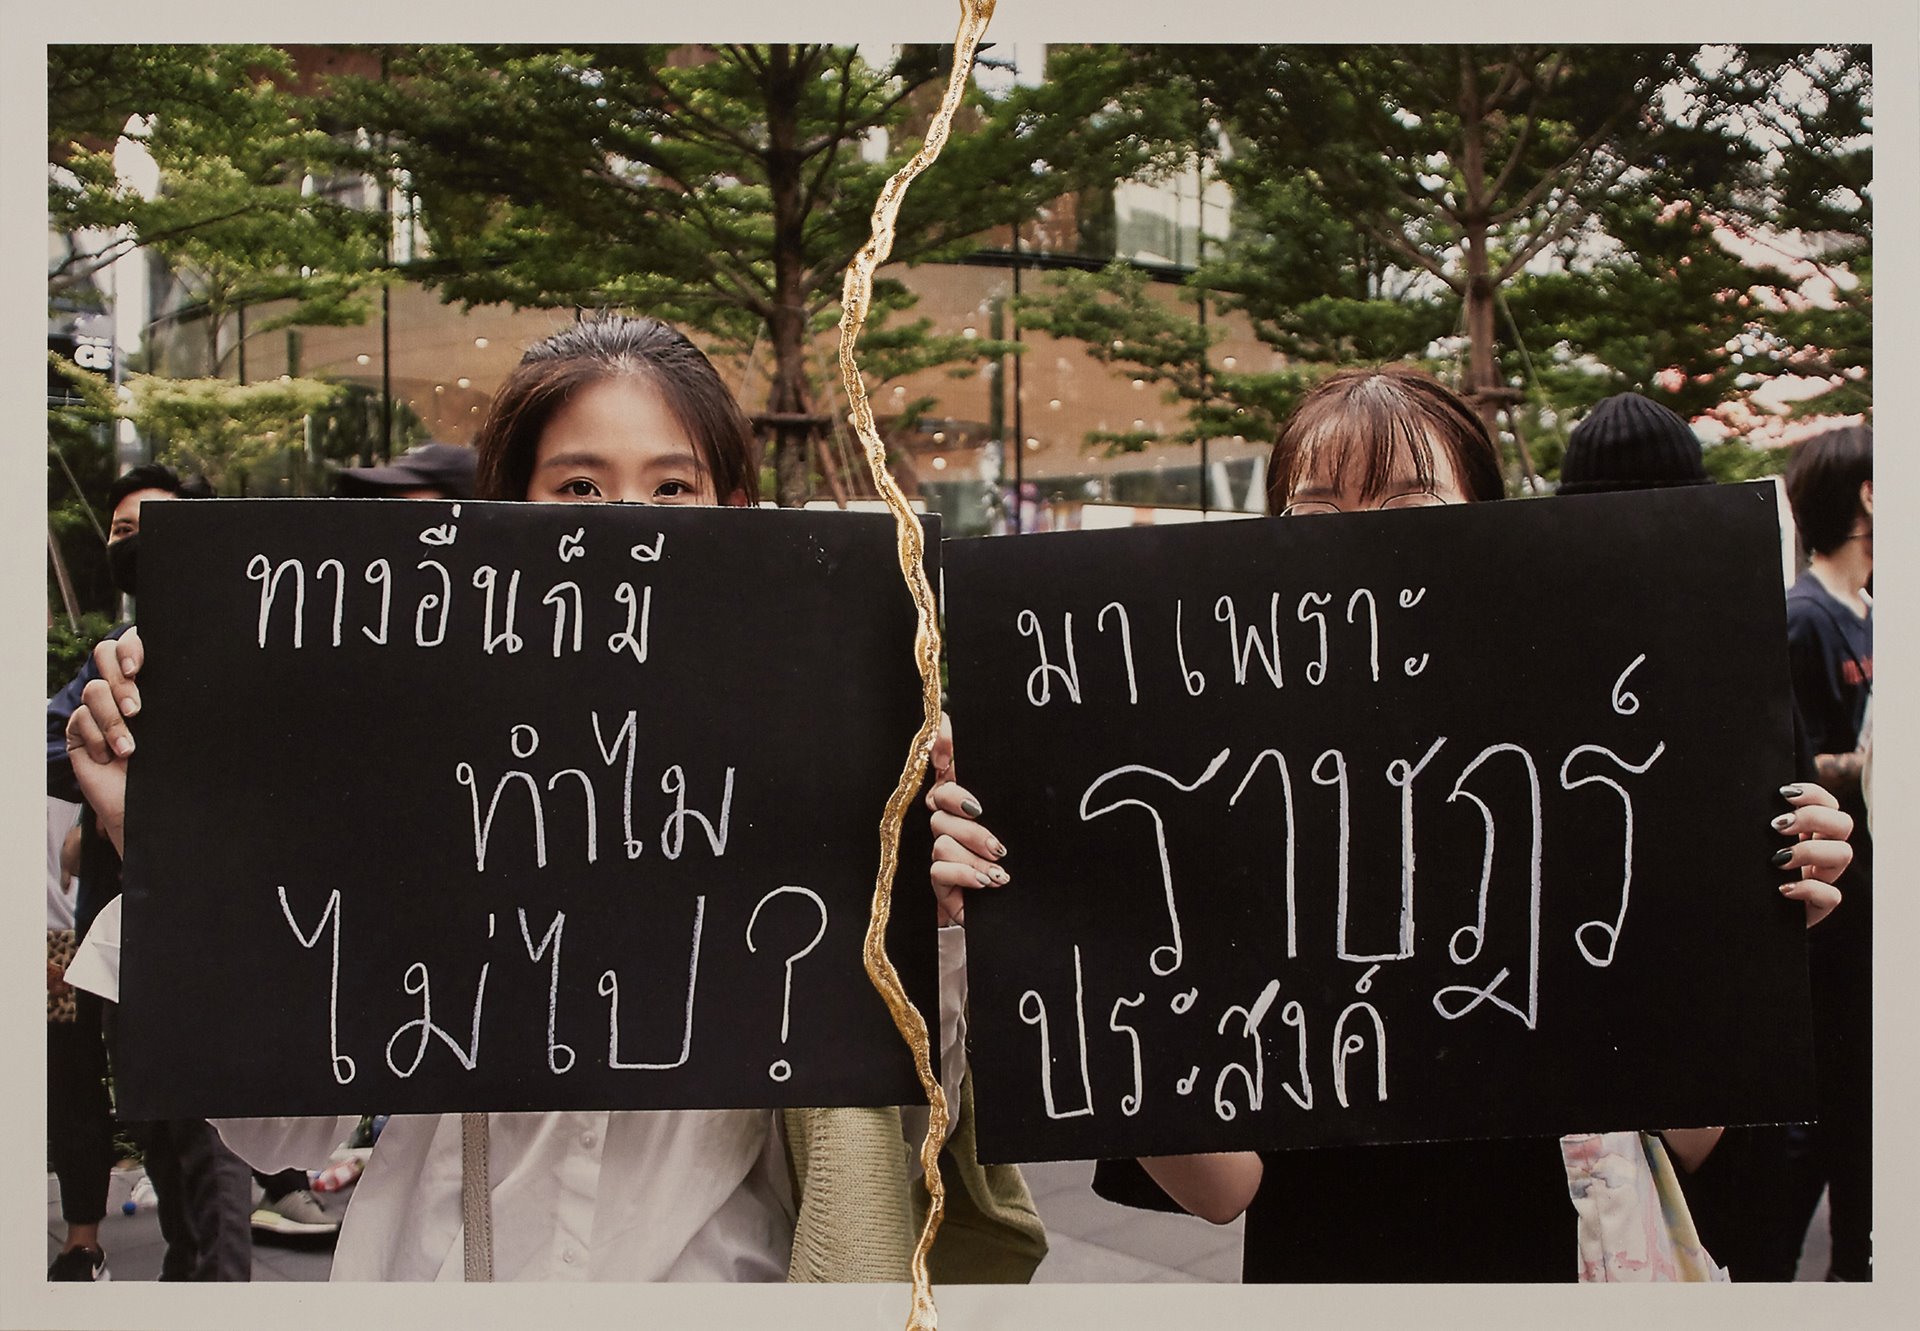 Protesters hold signs during a demonstration in Bangkok, Thailand.&nbsp;<br />
<br />
The signs say &ldquo;There is another way, why not go?&rdquo; (L) and &ldquo;Come because the people wish it&rdquo; (R).